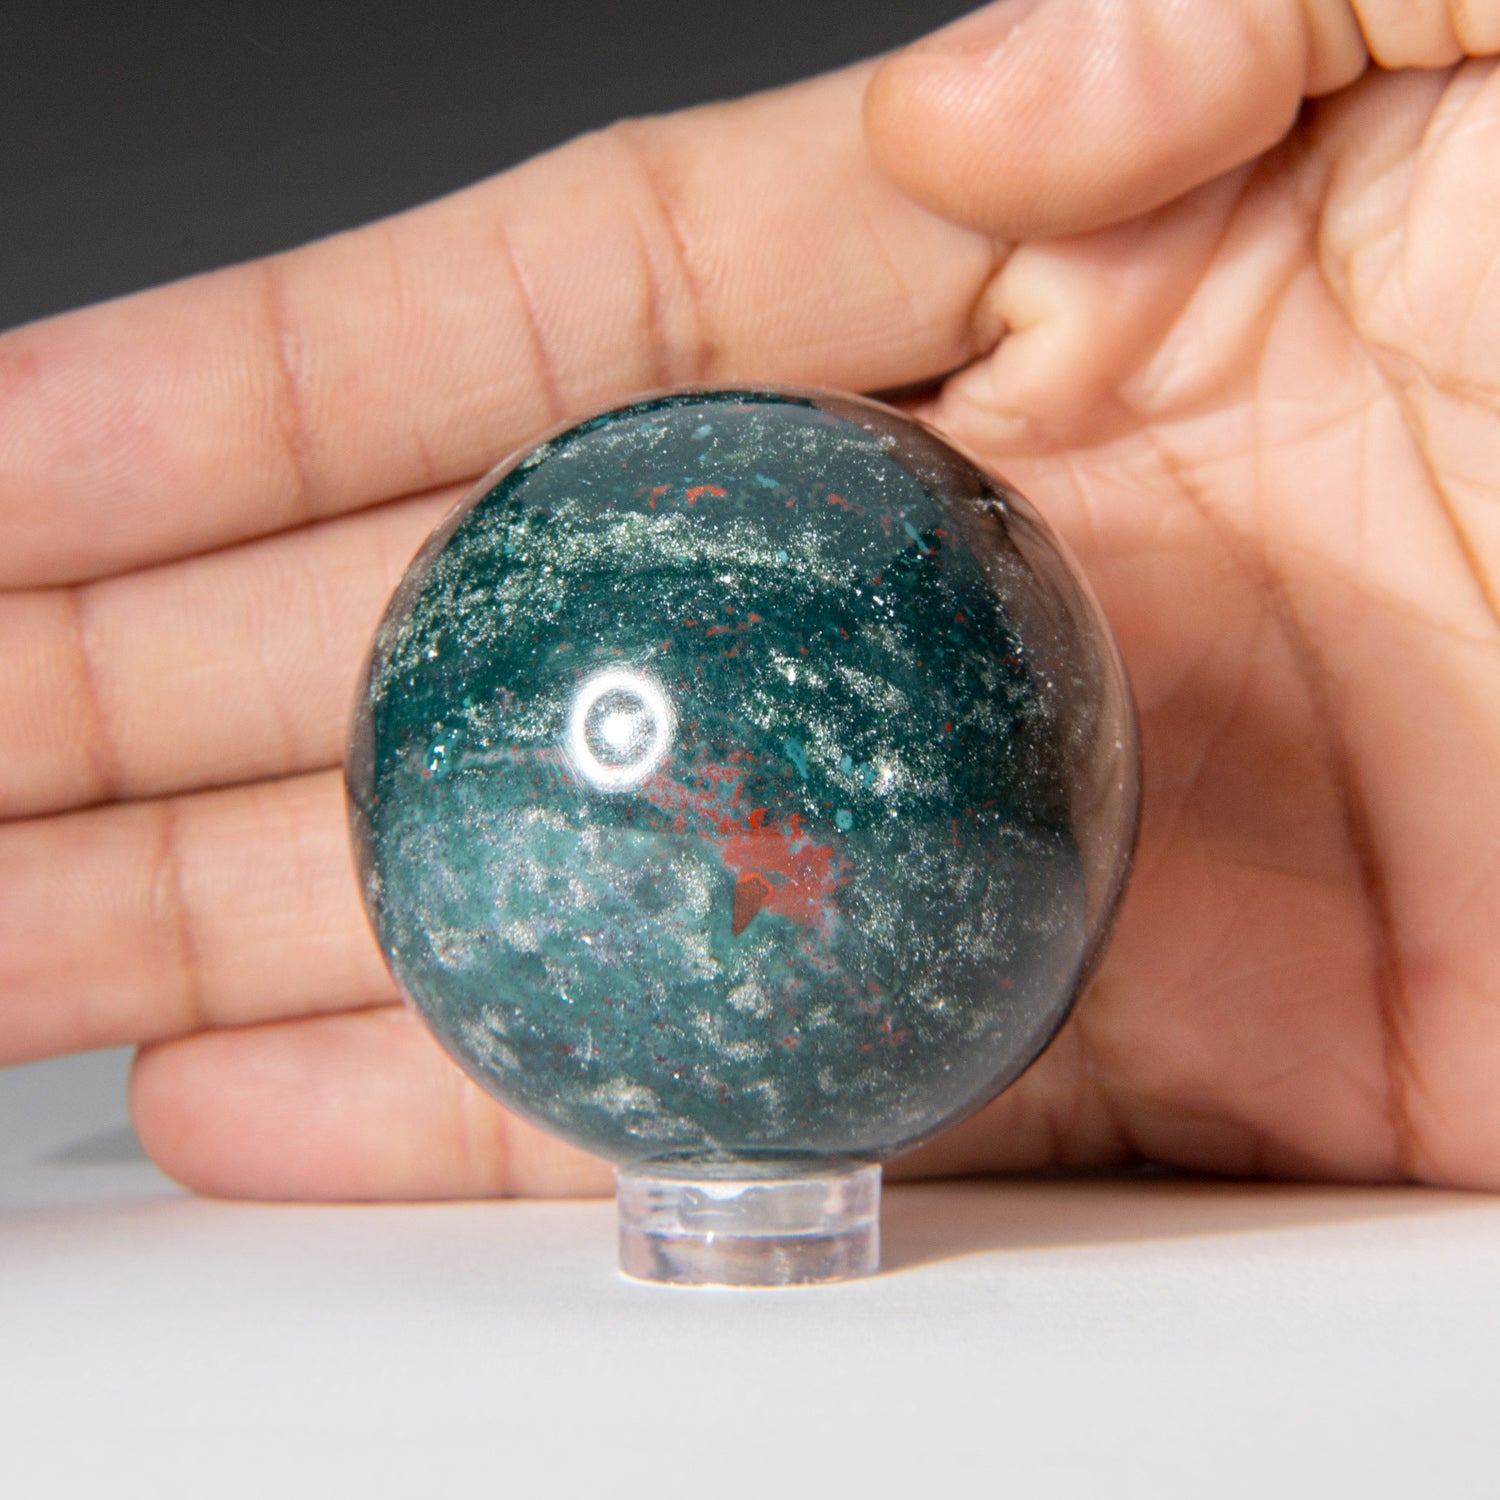 Genuine Polished Bloodstone Sphere (1.75") with Acrylic Display Stand